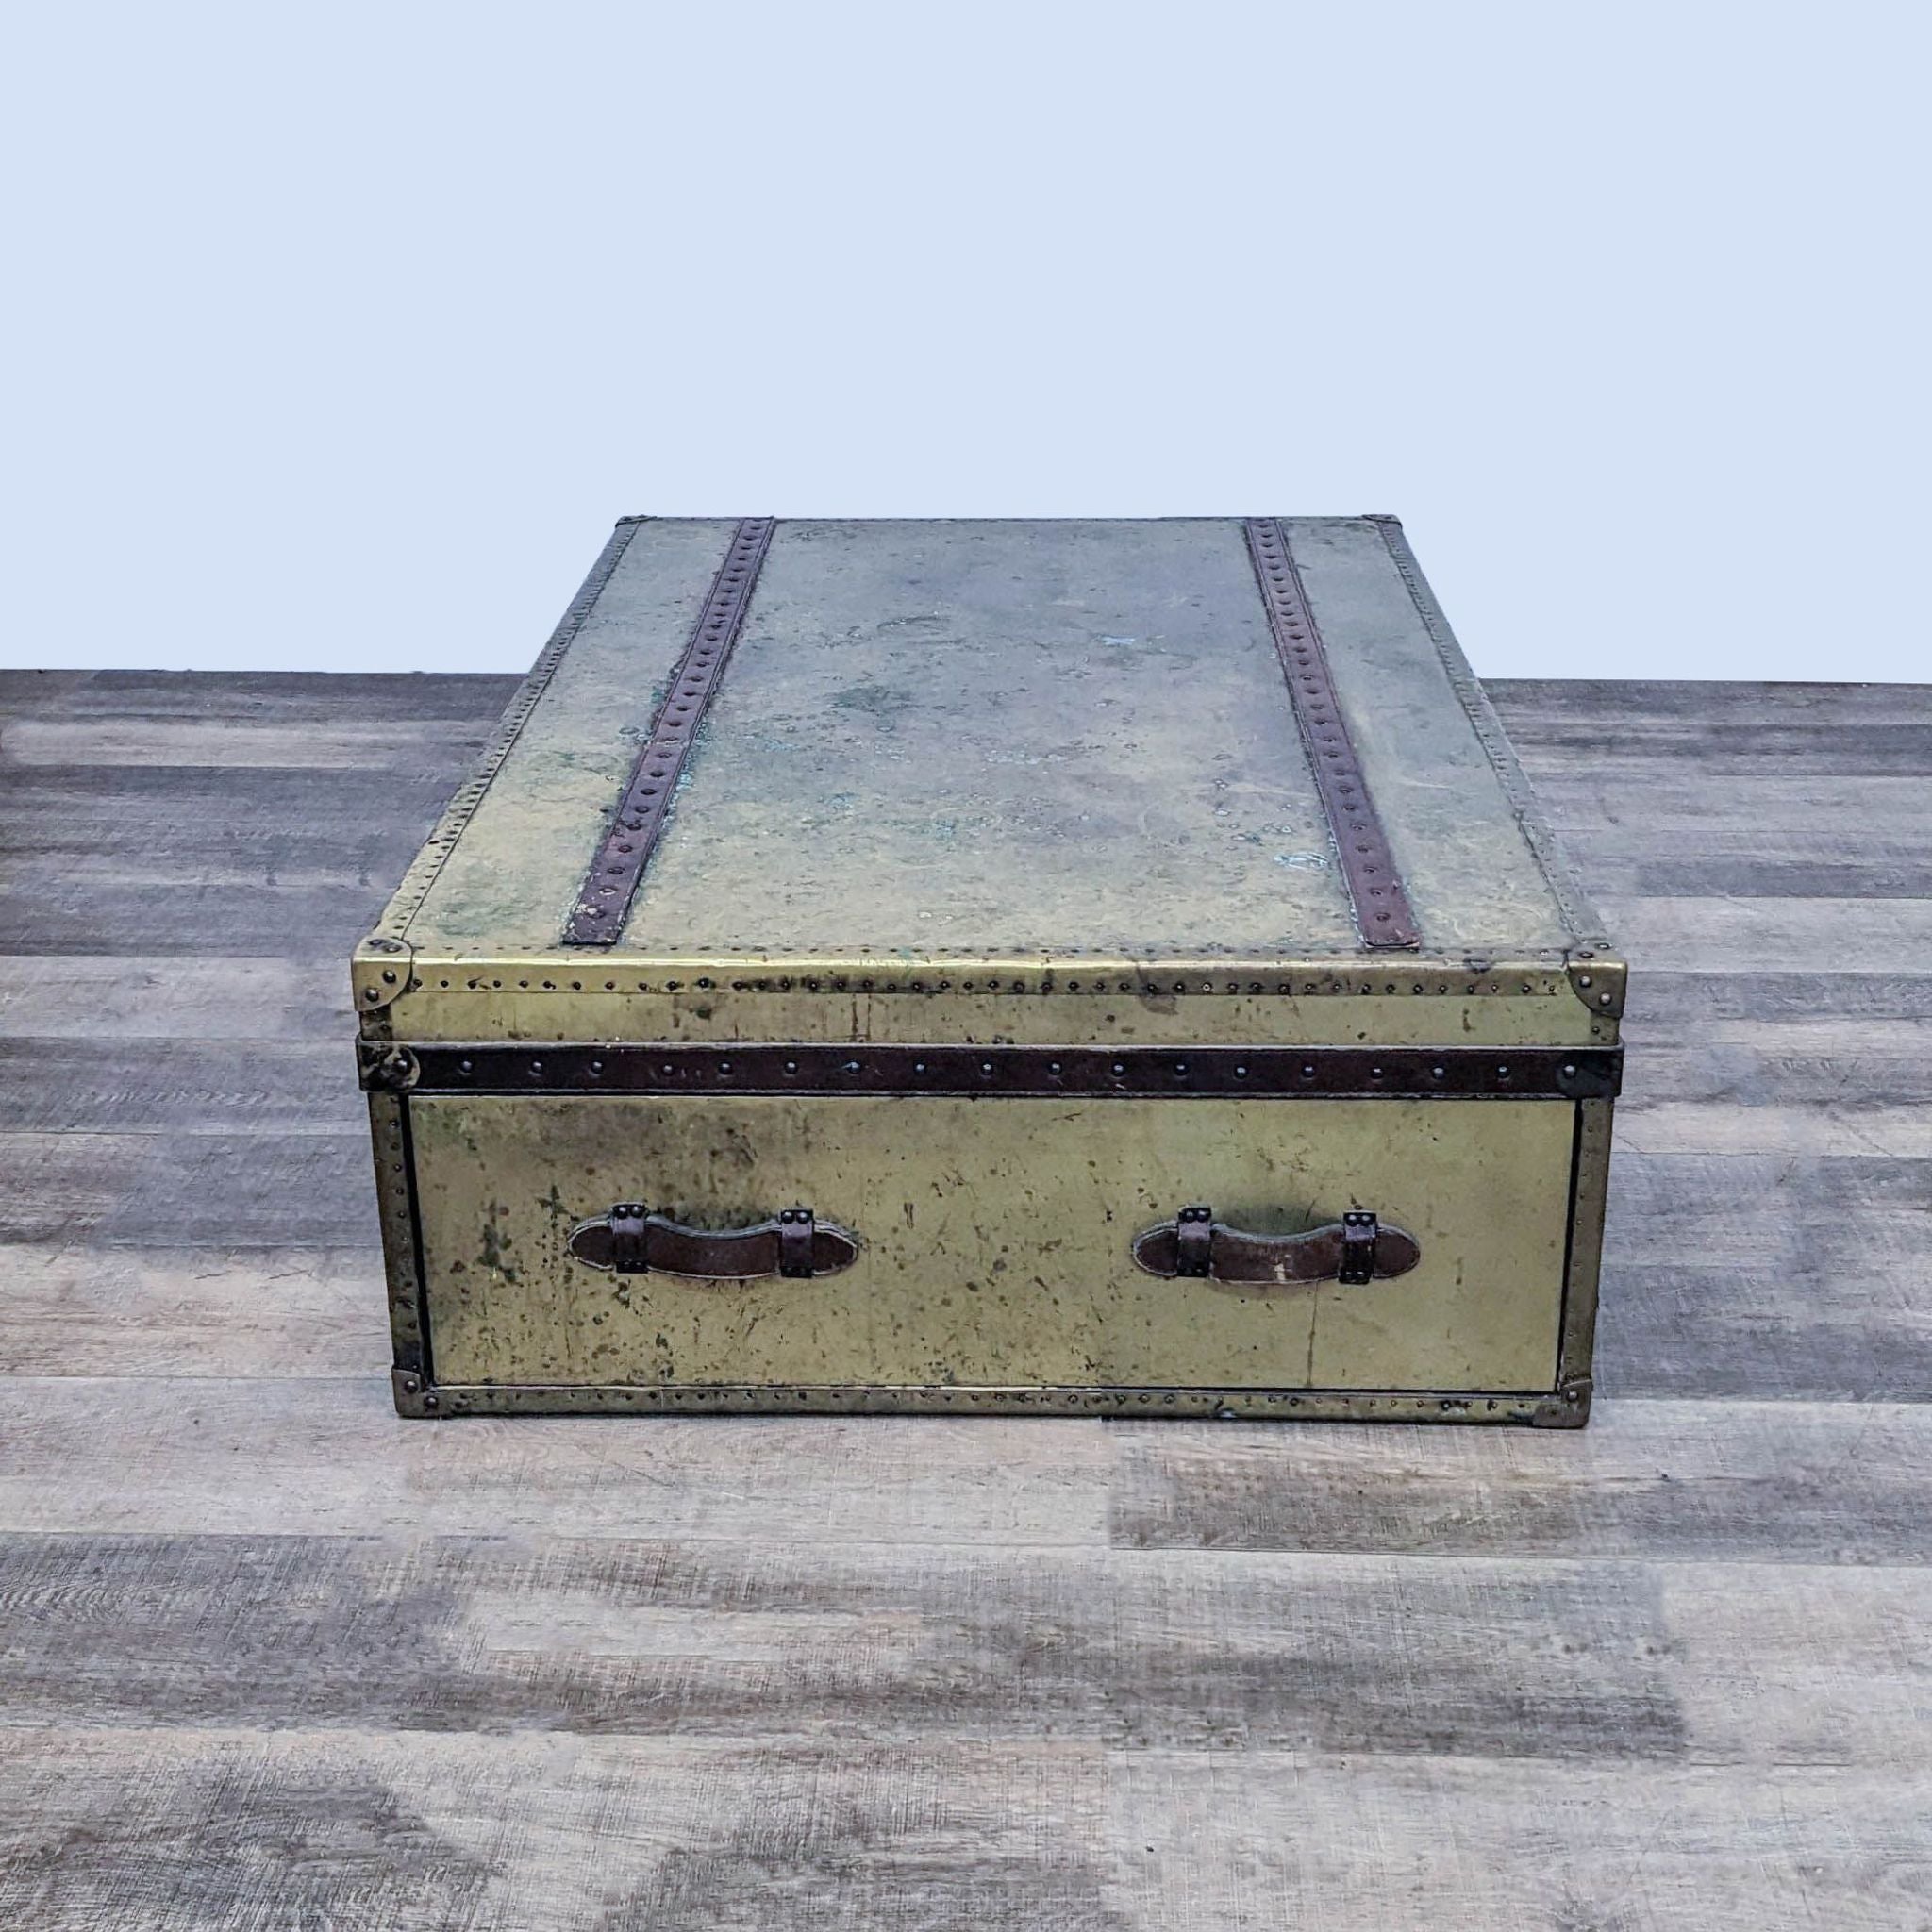 Reperch vintage coffee table with distressed finish and leather handles on the drawers, showcased from the top angle.